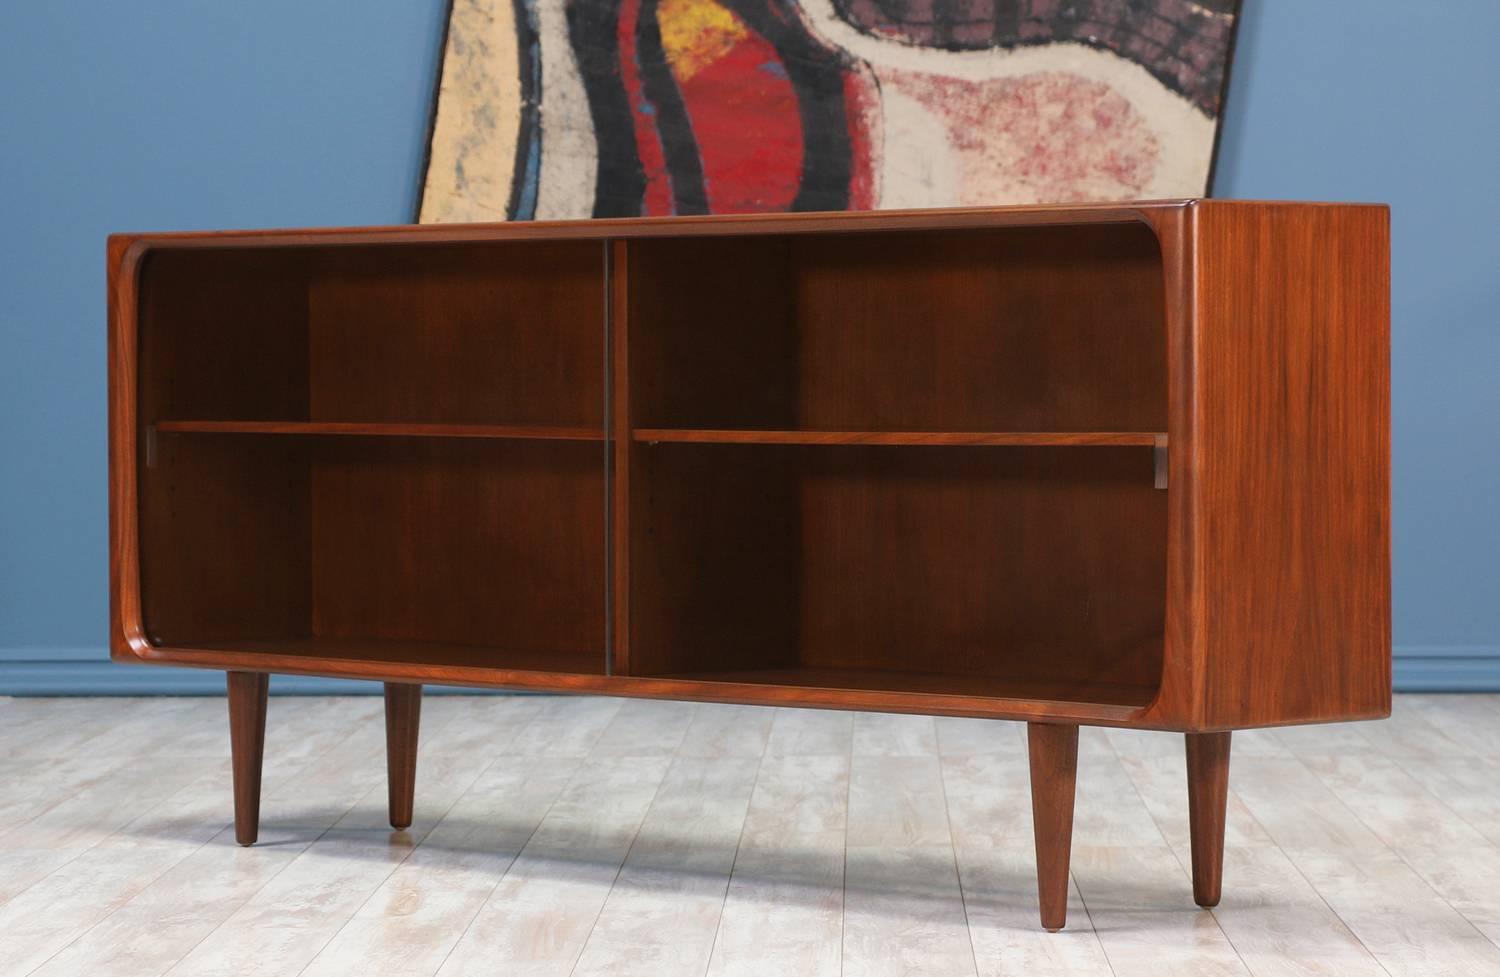 Danish Modern Bookcase designed and manufactured in Denmark circa 1960's. Beautifully crafted with a walnut wood frame and tapered legs, this piece is narrow in design with removable shelves and maintains its original glass doors showing minor